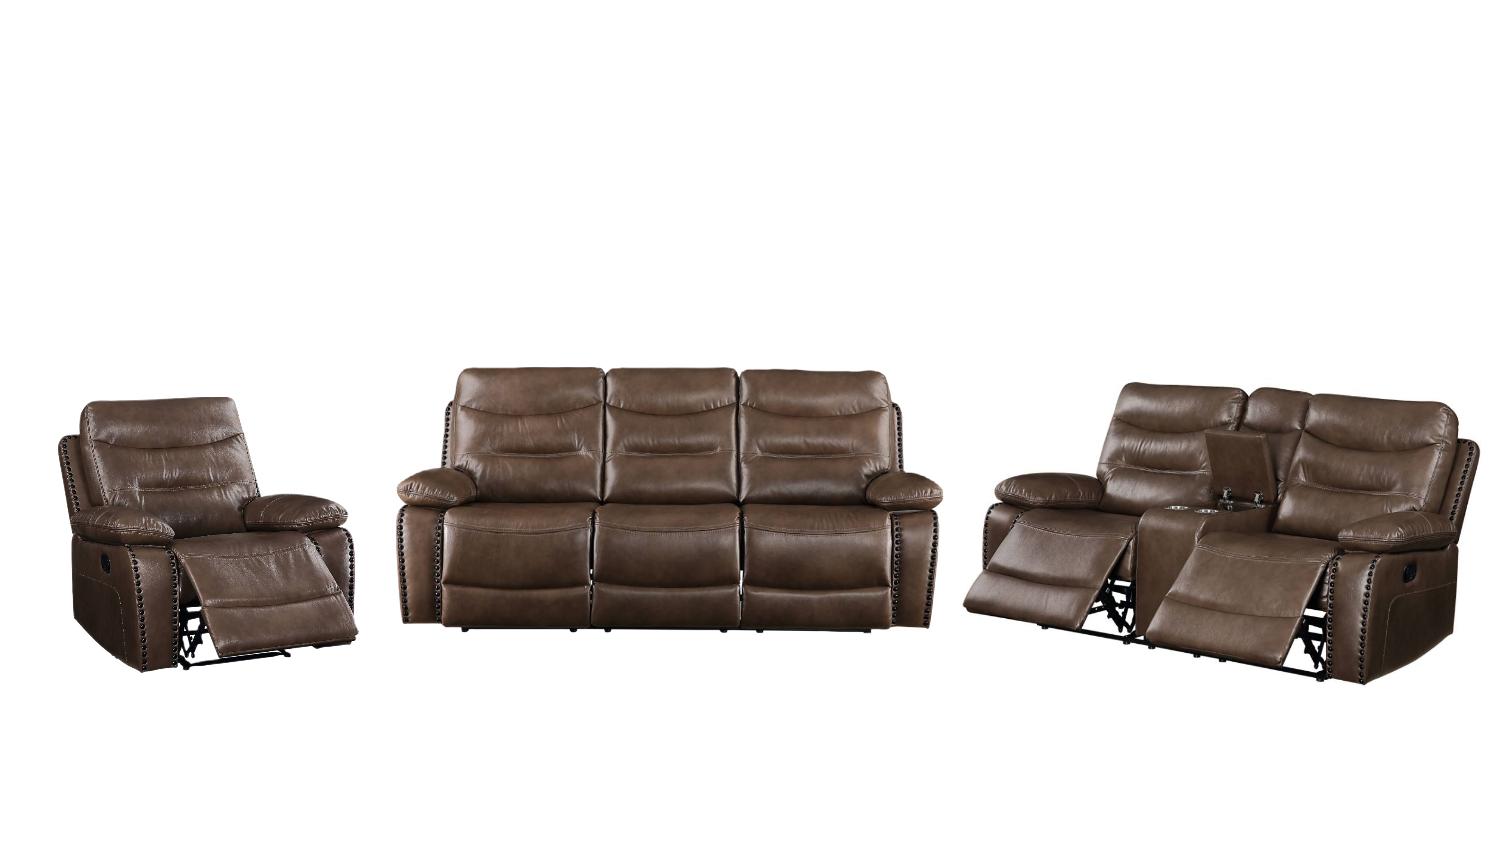 

    
Contemporary Brown Leather Motion Sofa + Loveseat + Recliner w/ Console by Acme Aashi 55420-3pcs
